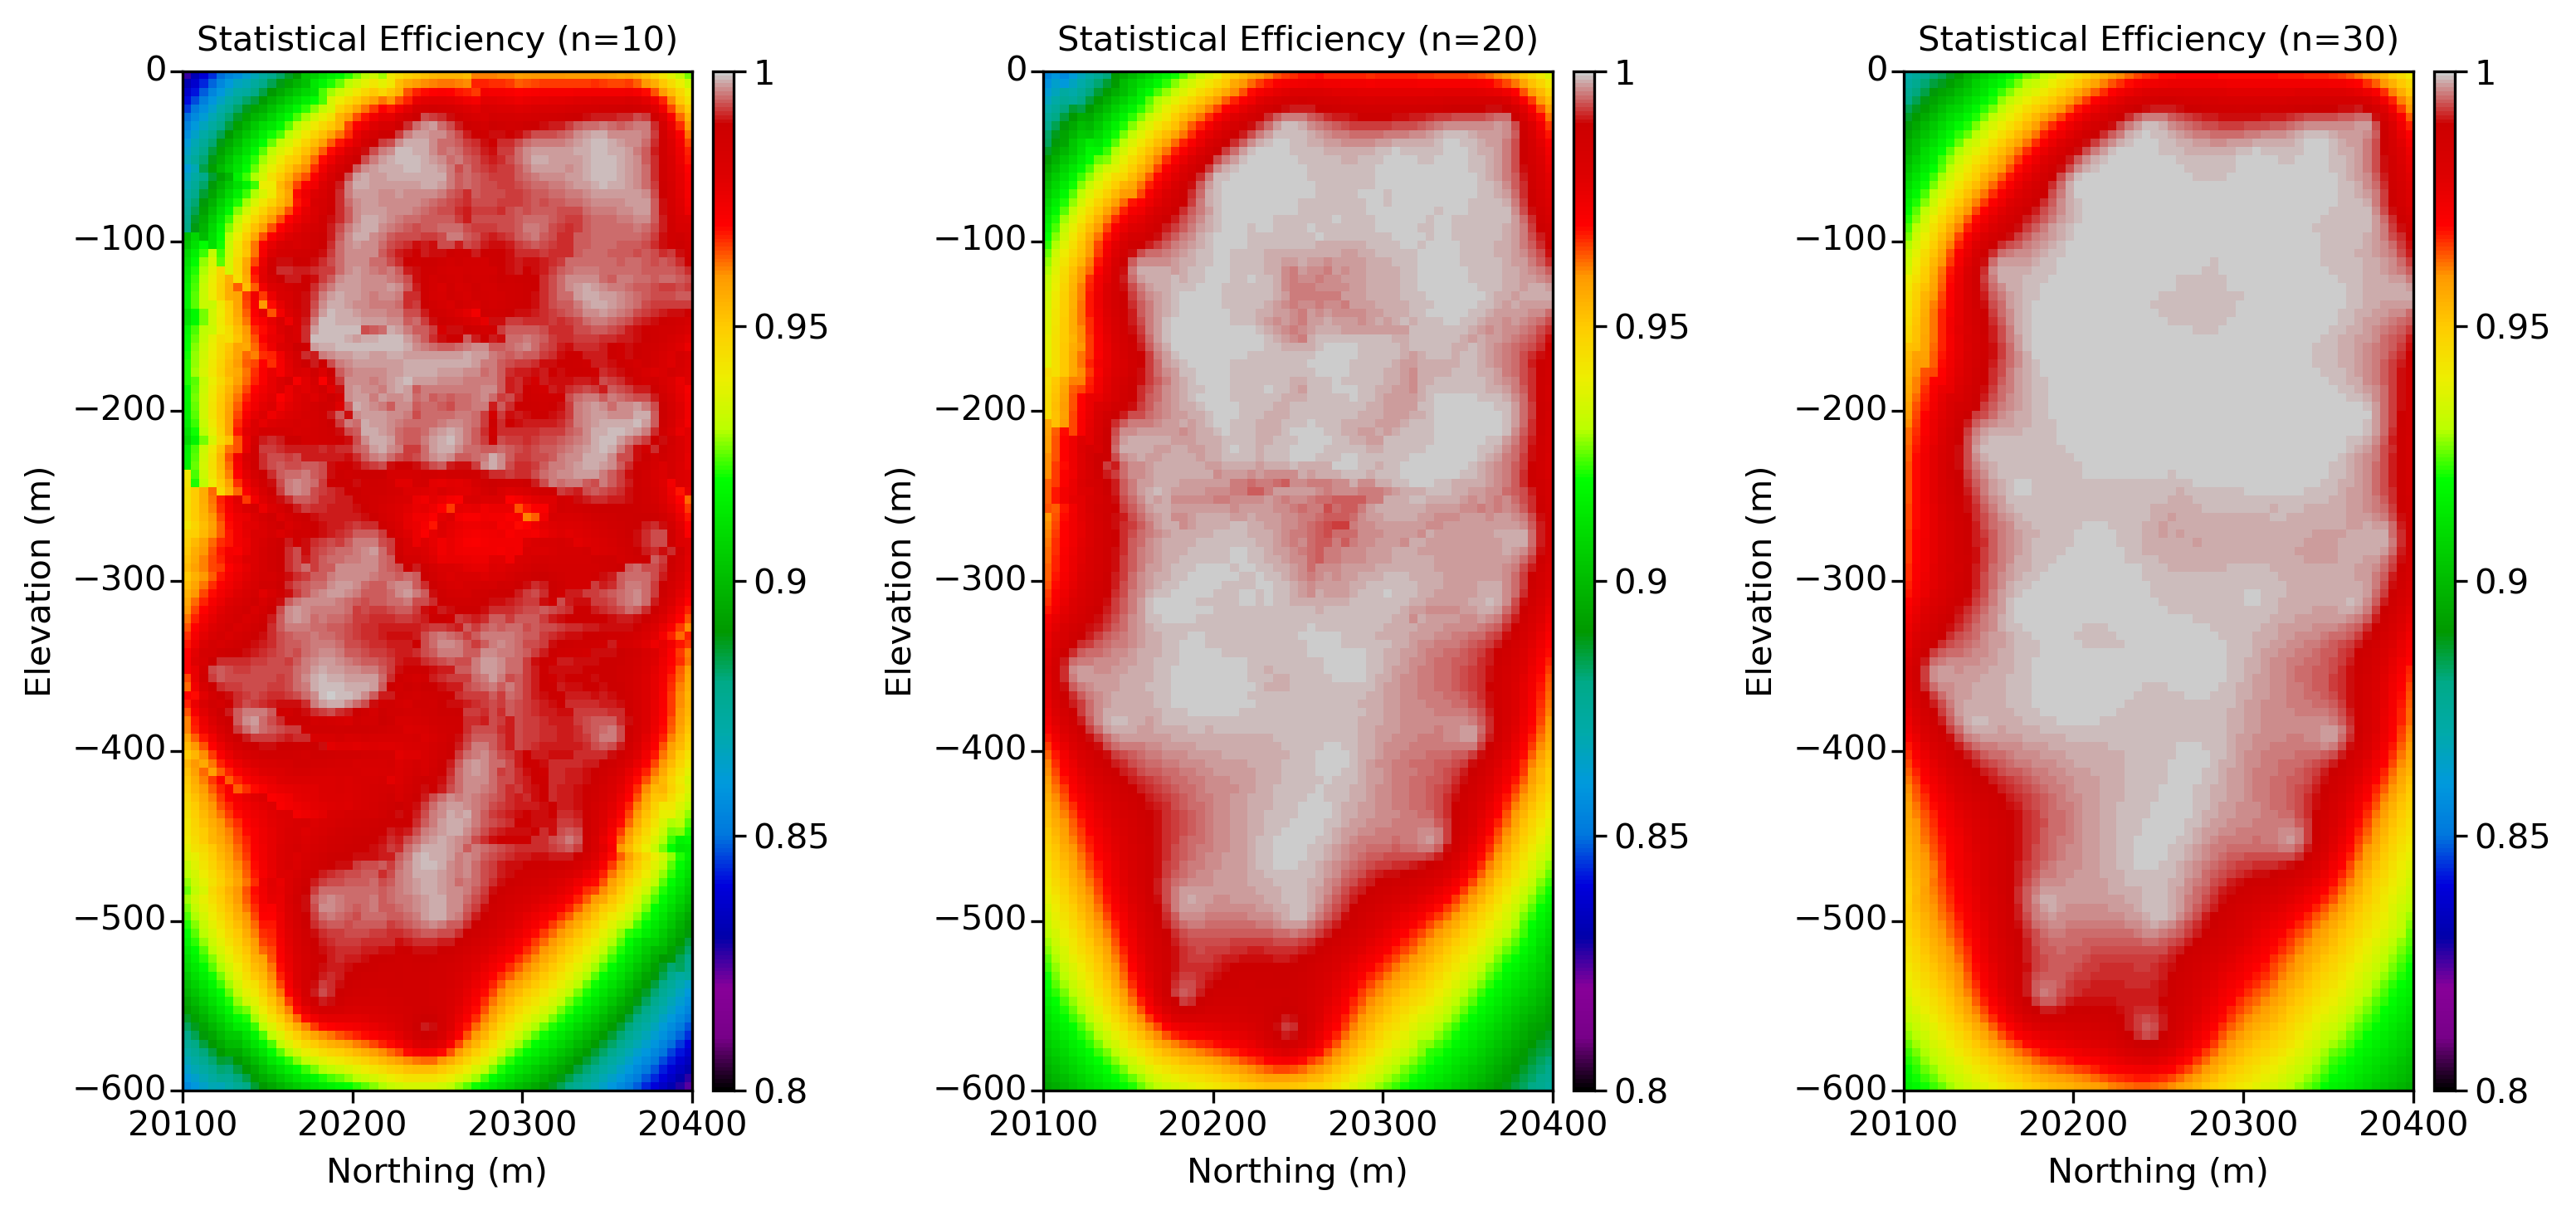 Figure 3: Statistical Efficiency map considering different number of data used for estimation (n=10,20,30).